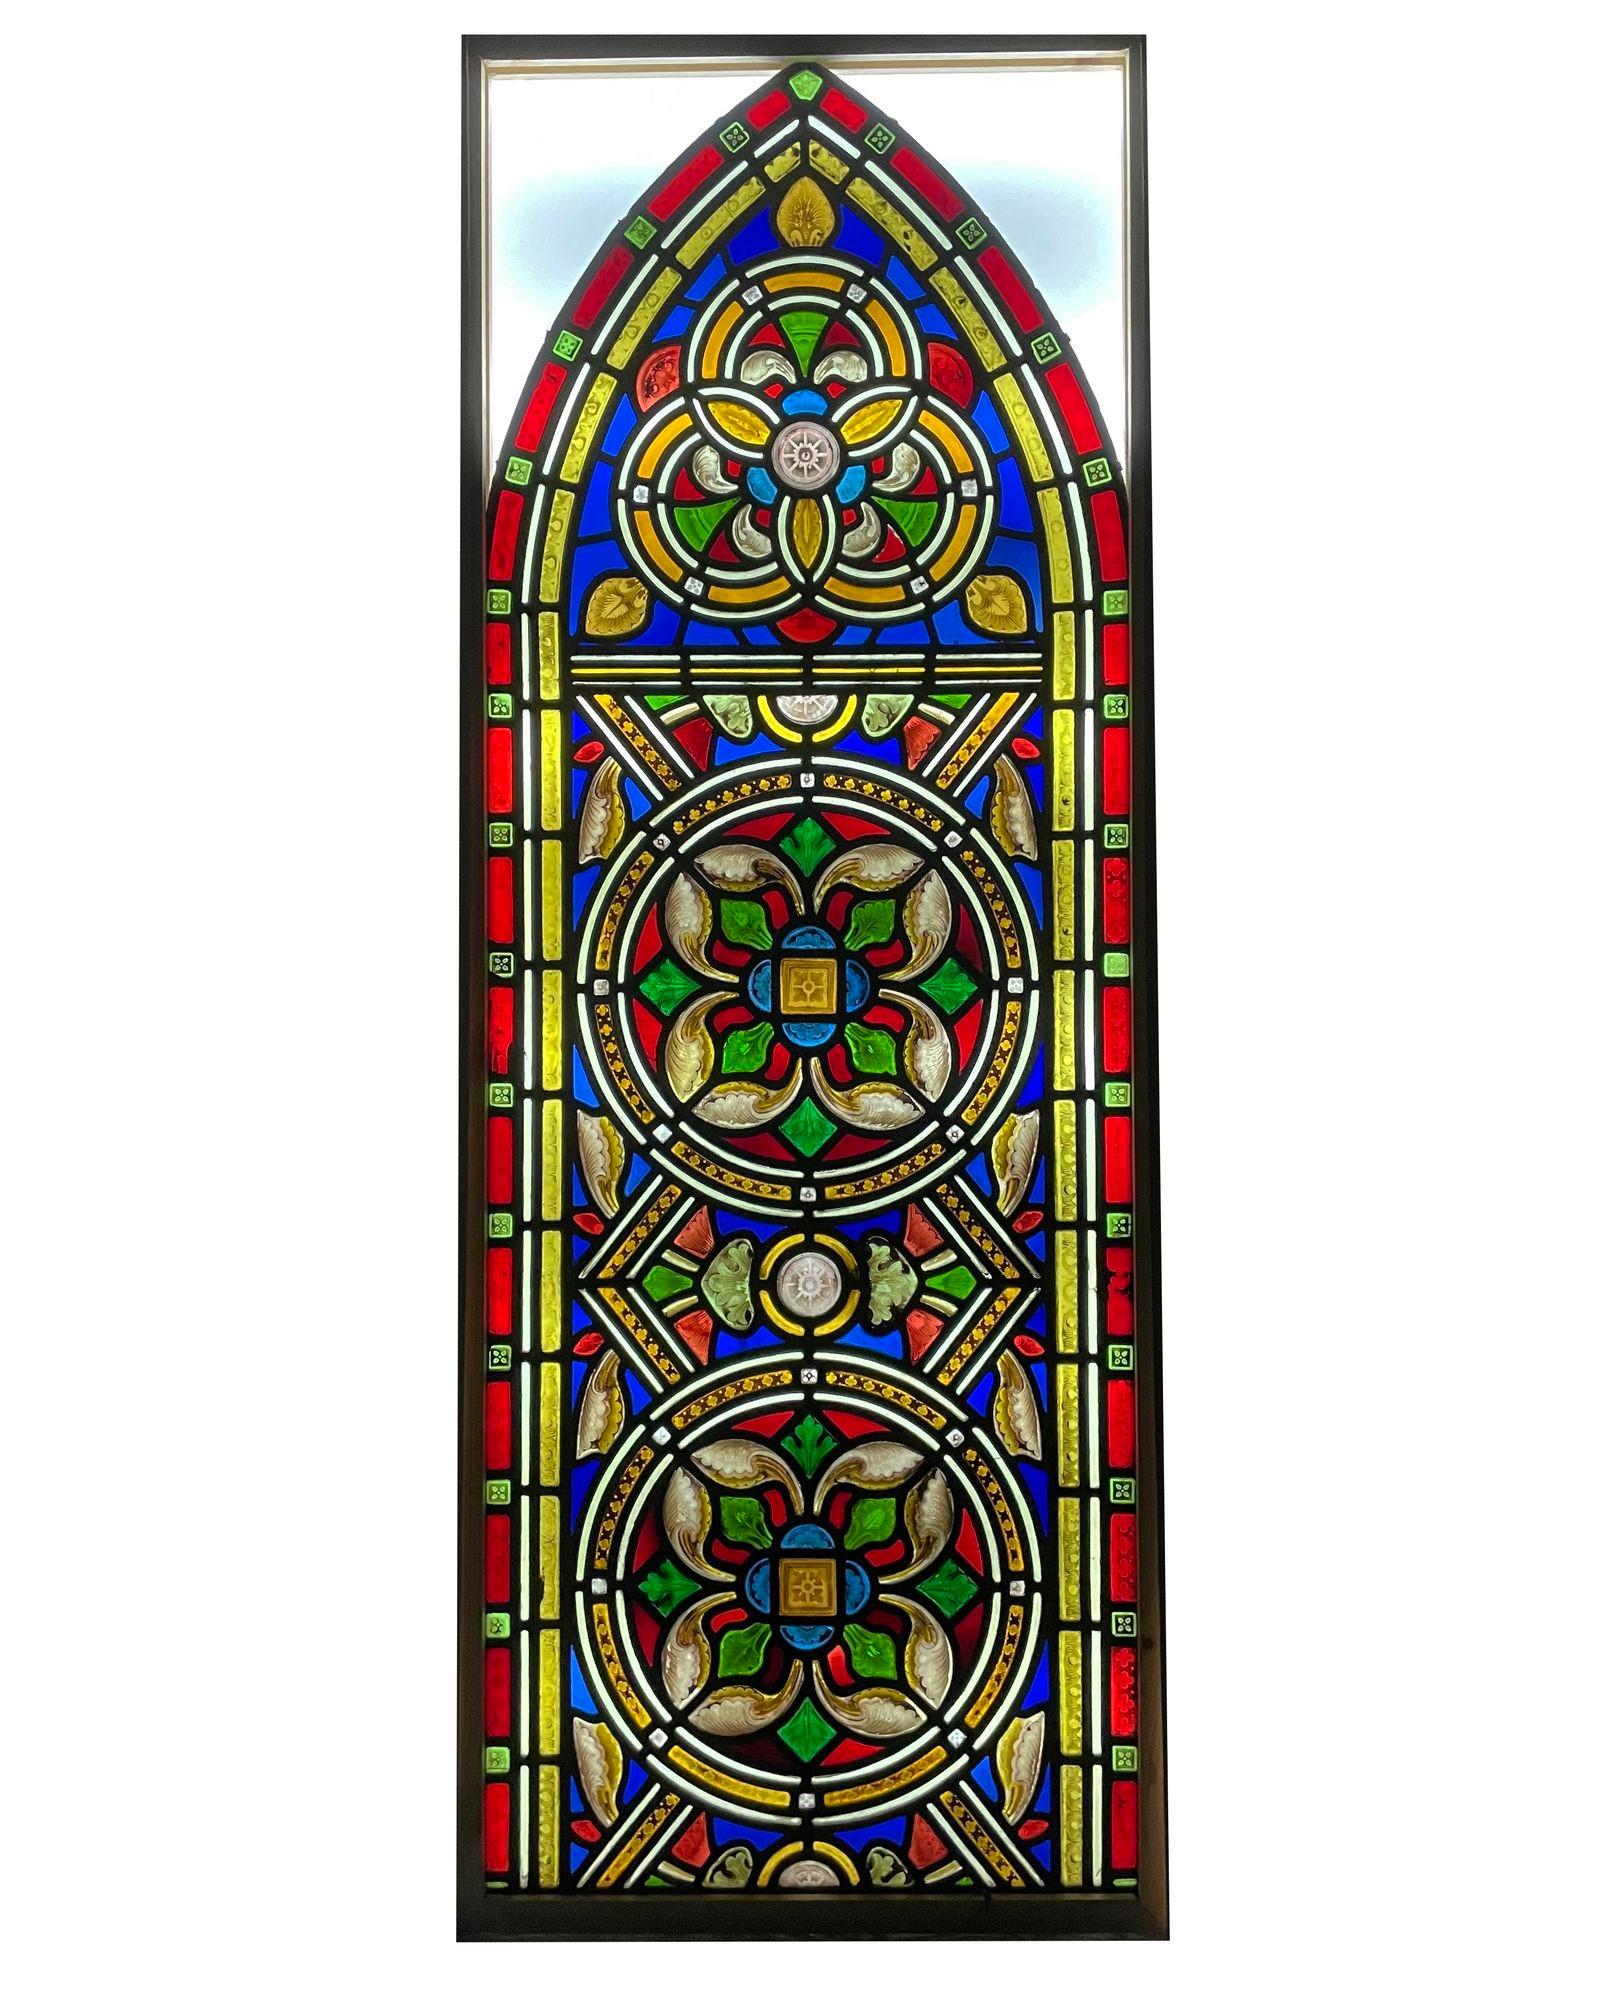 An antique Victorian arched stained glass window showcasing a stylised Tudor rose, originally from a church in northern England.

Three hand painted detailed flowers sit at the heart of this piece. It incorporates both ecclesiastical and medieval